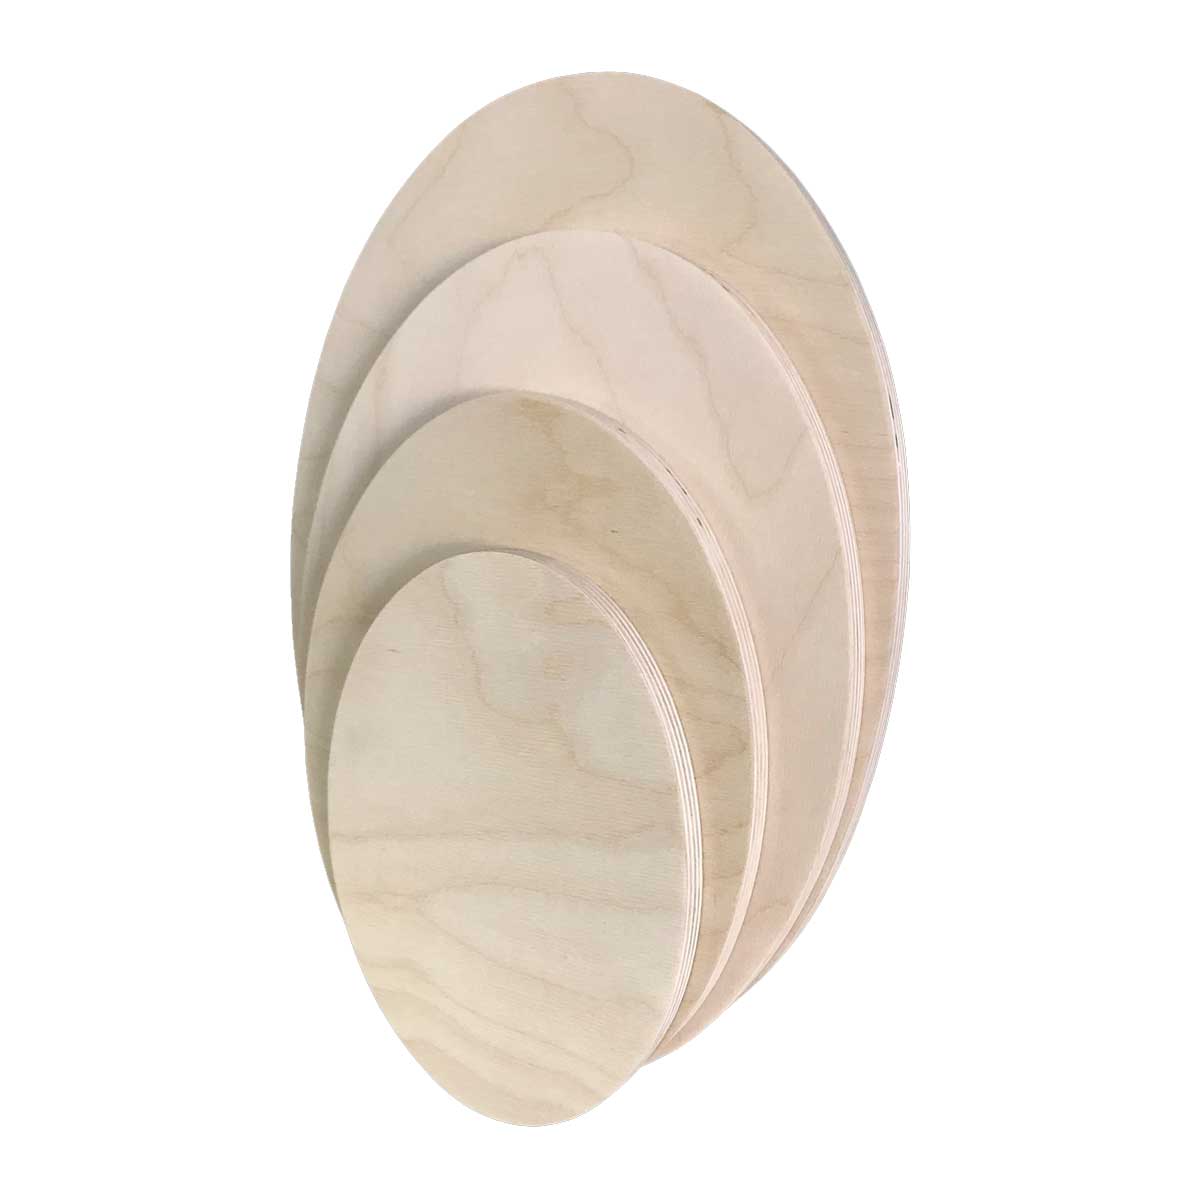 Raw Ellipse Panel Trekell Art Supplies Oval Wooden Canvas Baltic Birch 1/2" Thick for oil, acrylic, watercolor, gouache, enamel encaustic paint, pastel, charcoal, pencil, pyrography